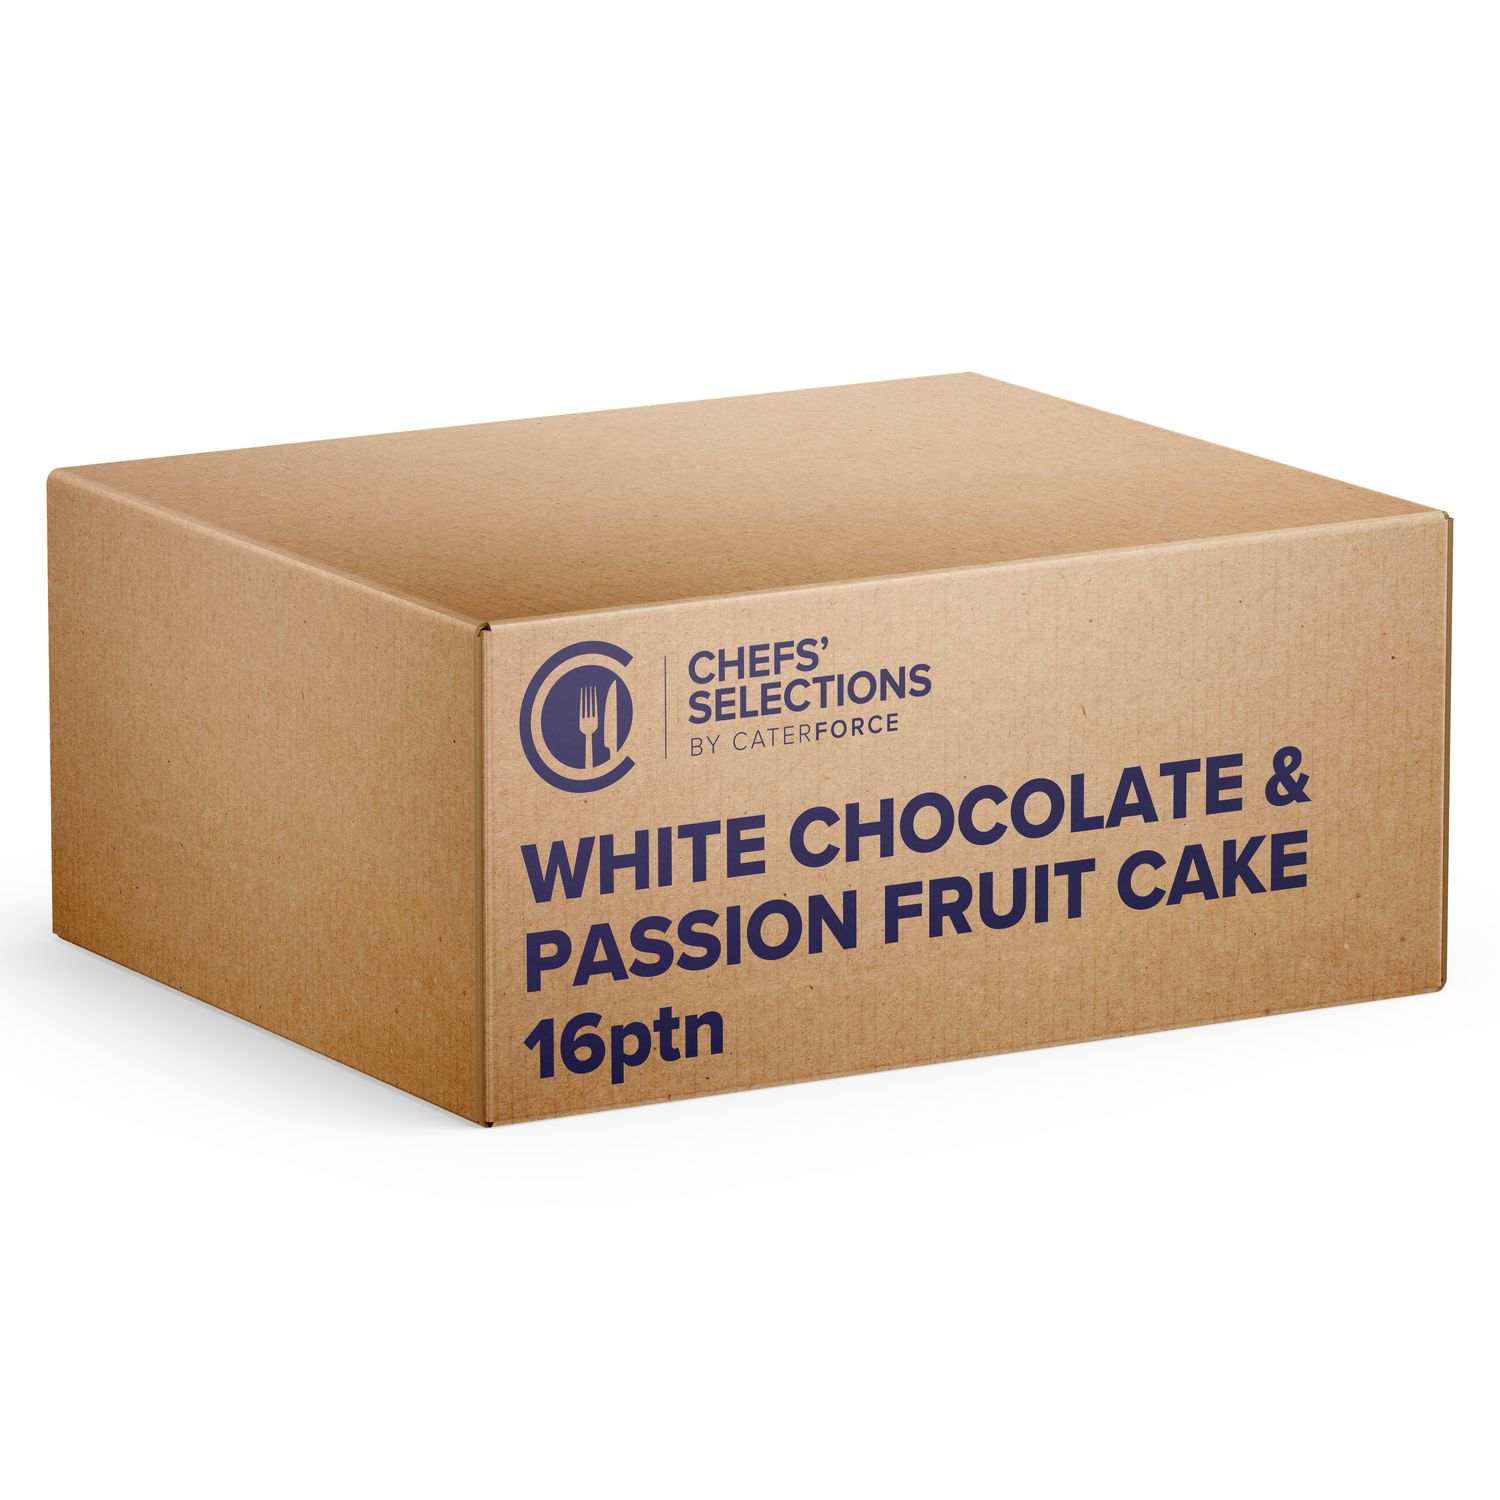 Chefs’ Selections Passionfruit & White Chocolate Cake (1 x 16p/ptn)